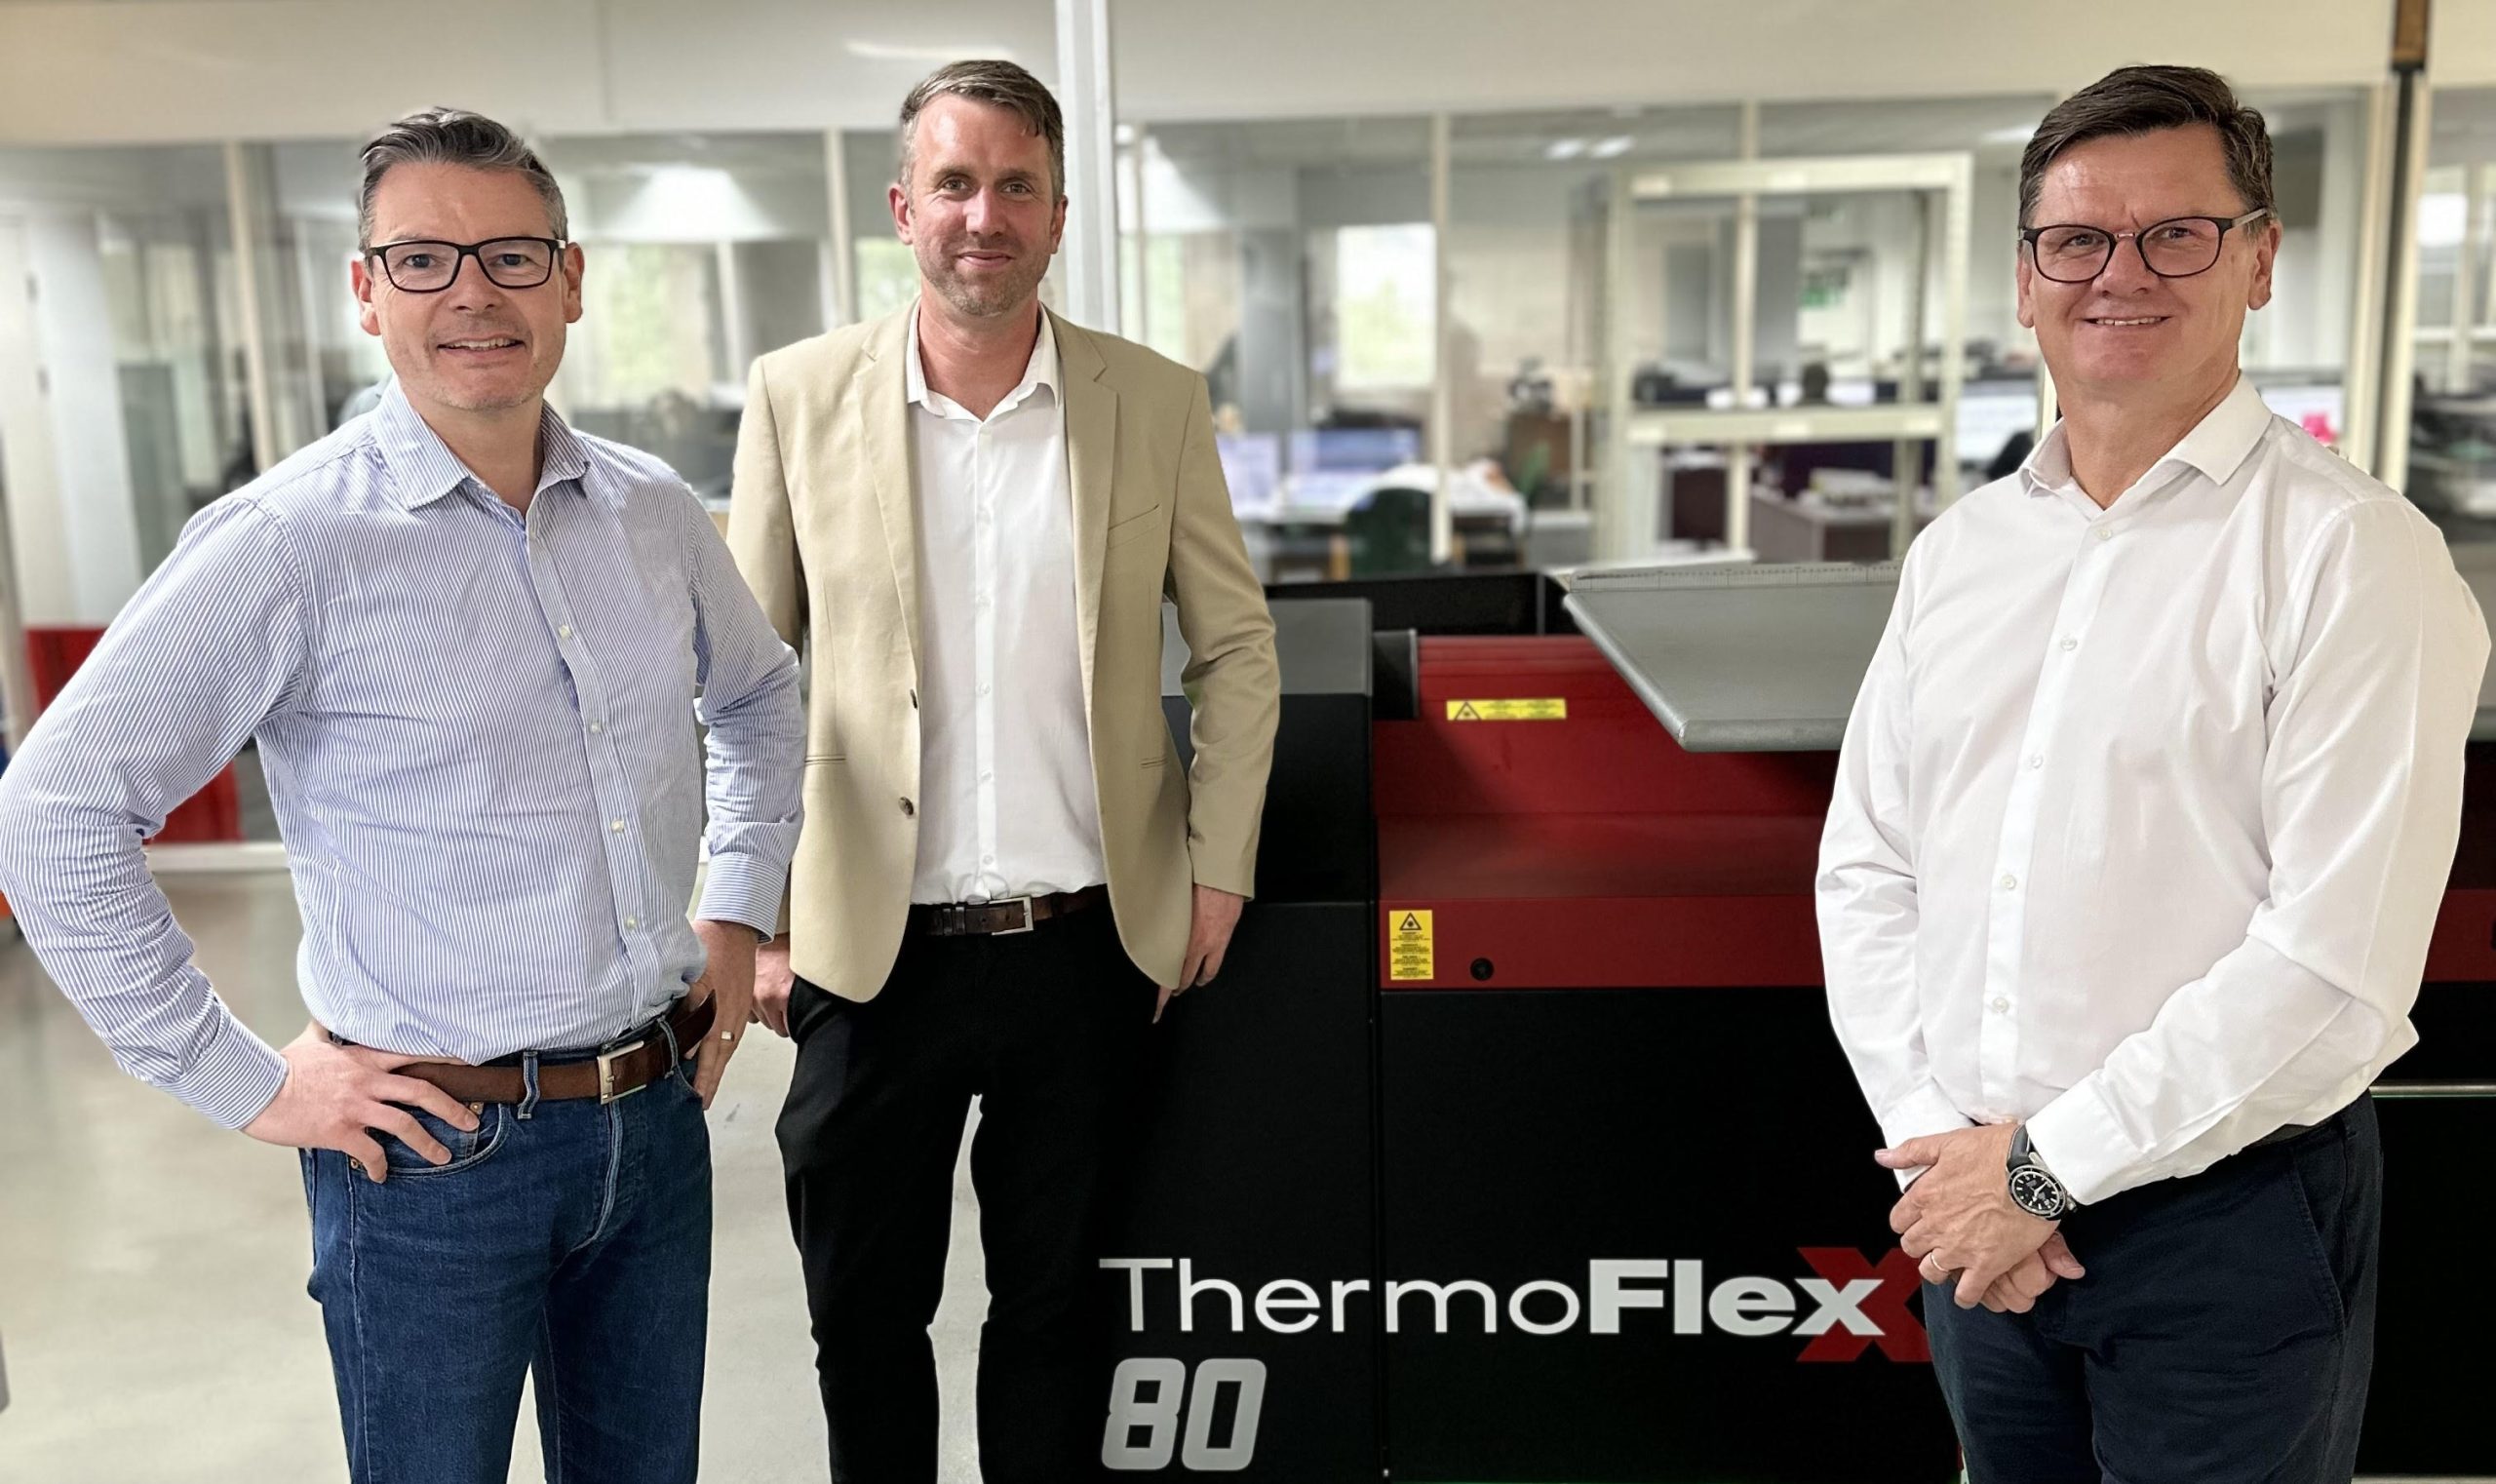 (Left to Right): Andrew Hewitson CEO at Reproflex3, Leigh Williamson, XSYS Global Sales Manager, UK & Ireland and Trevor Lowes, Group COO at Reproflex3.